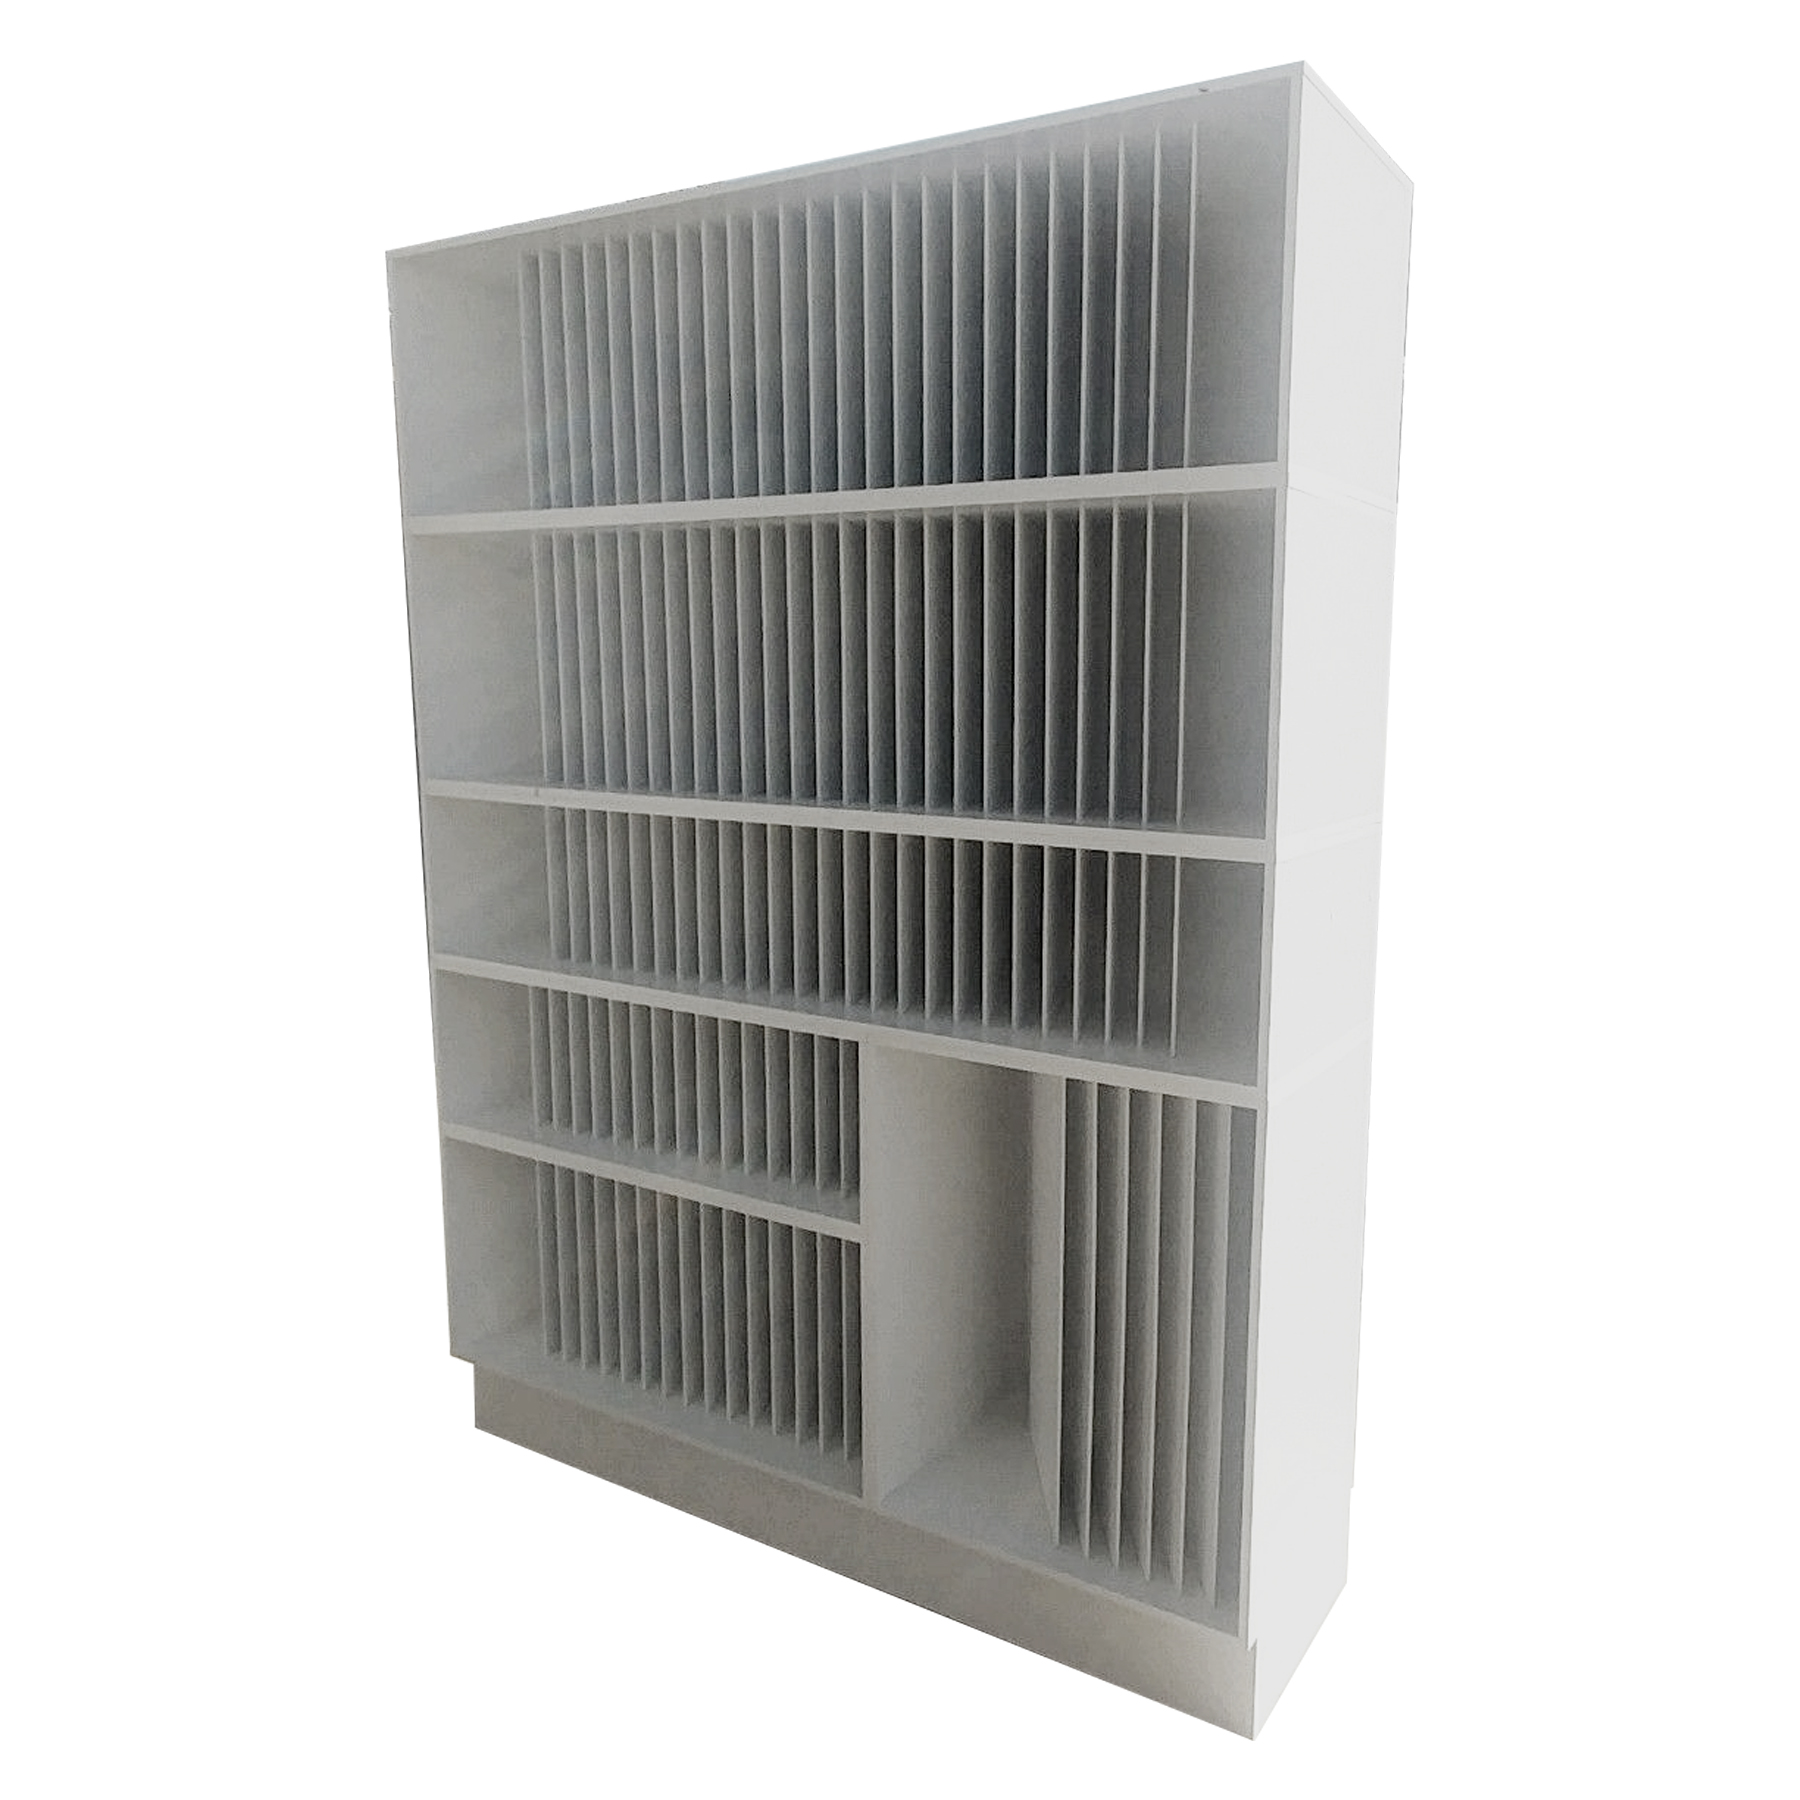 McHandy Rack Vertical Shelf Tower Display White Finish Custom Size Partitions for Different Sized Samples